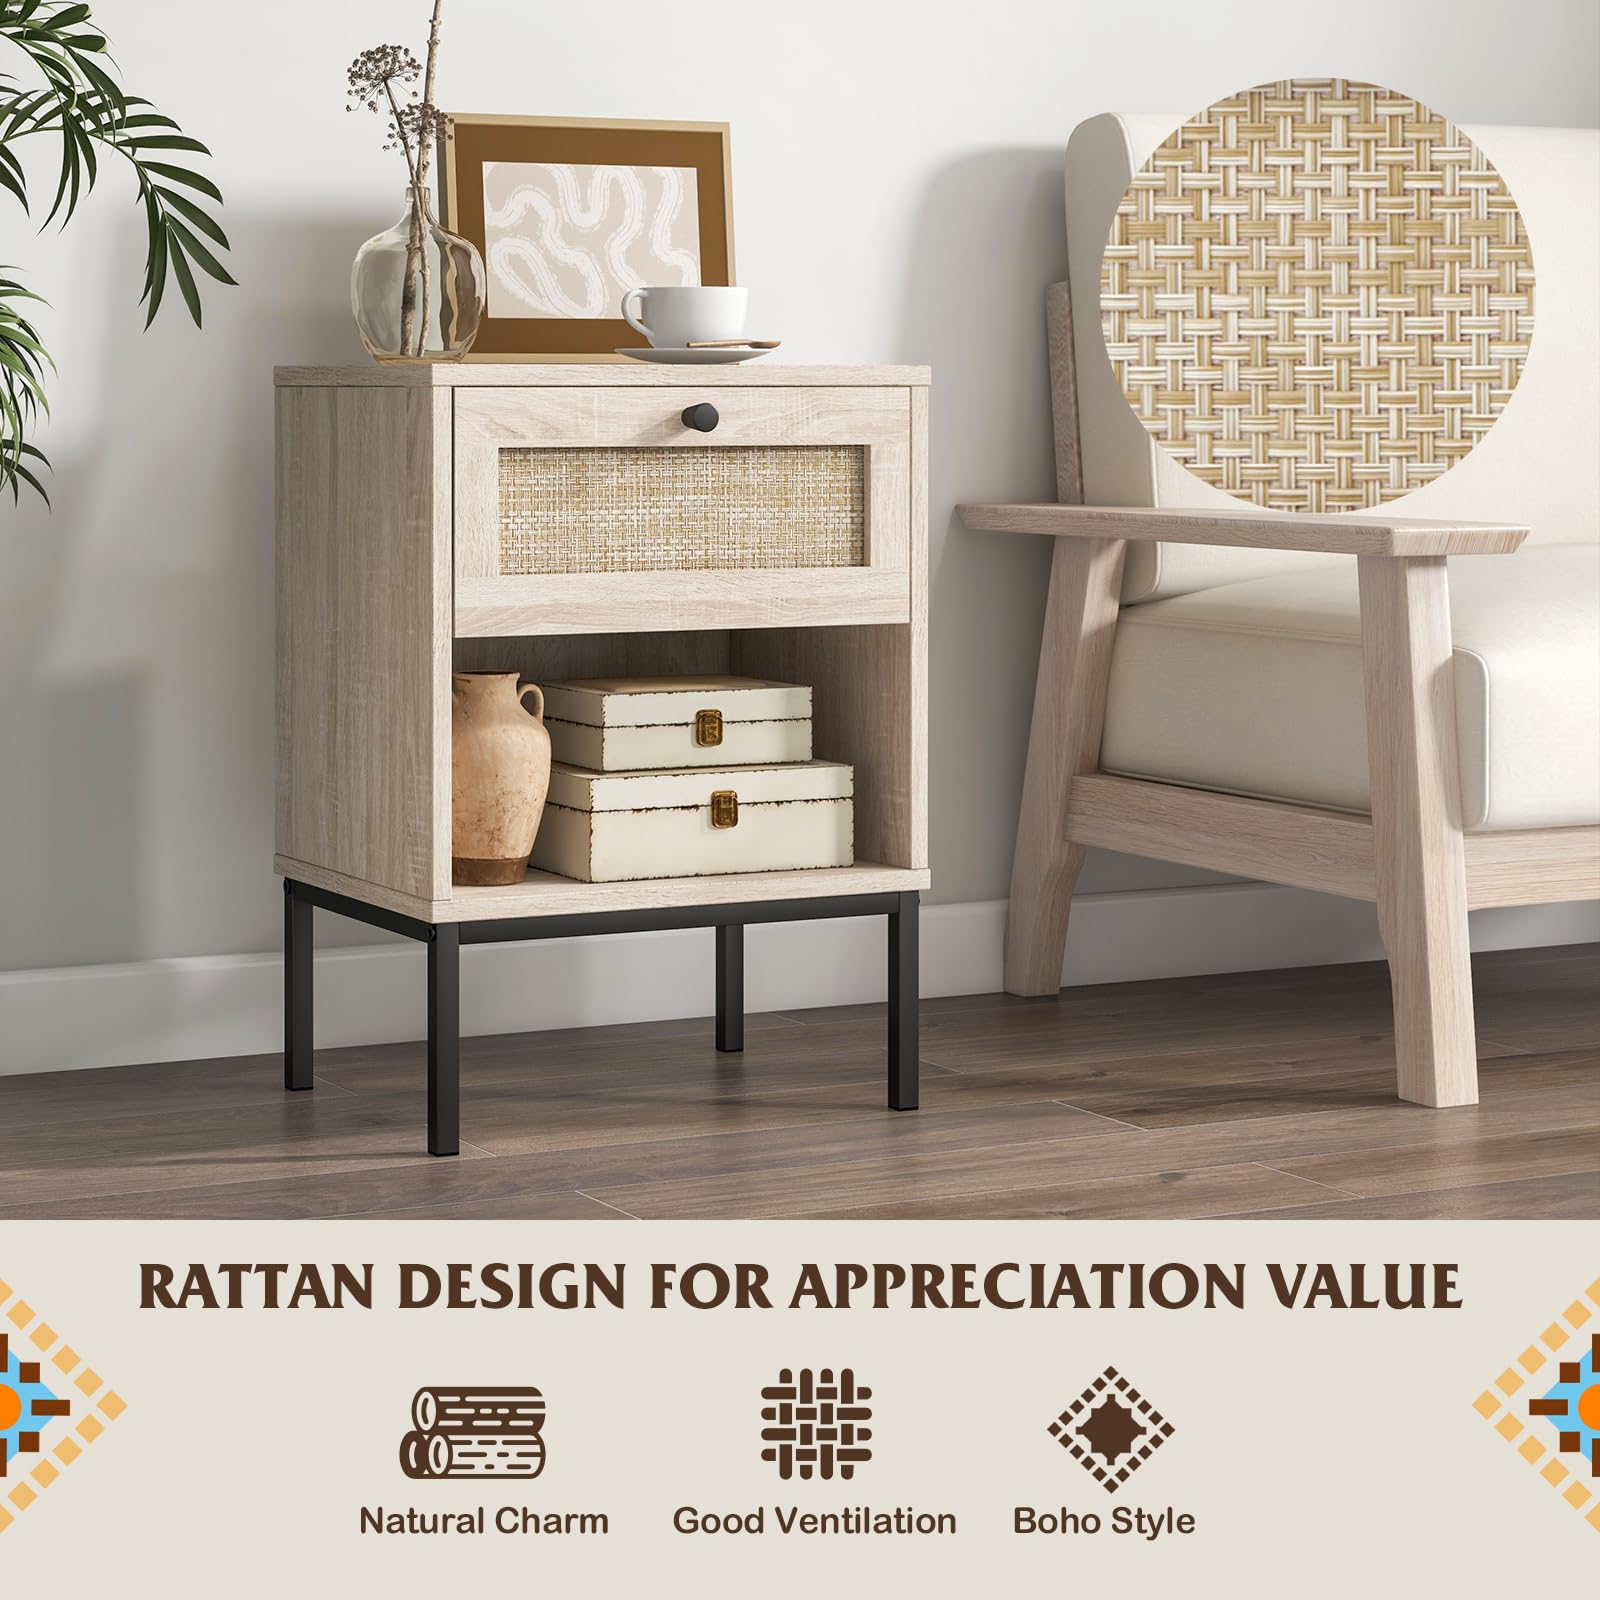 Giantex Rattan Nightstand with Drawer, Boho Side Table with 4 Metal Legs and Open Storage Shelf